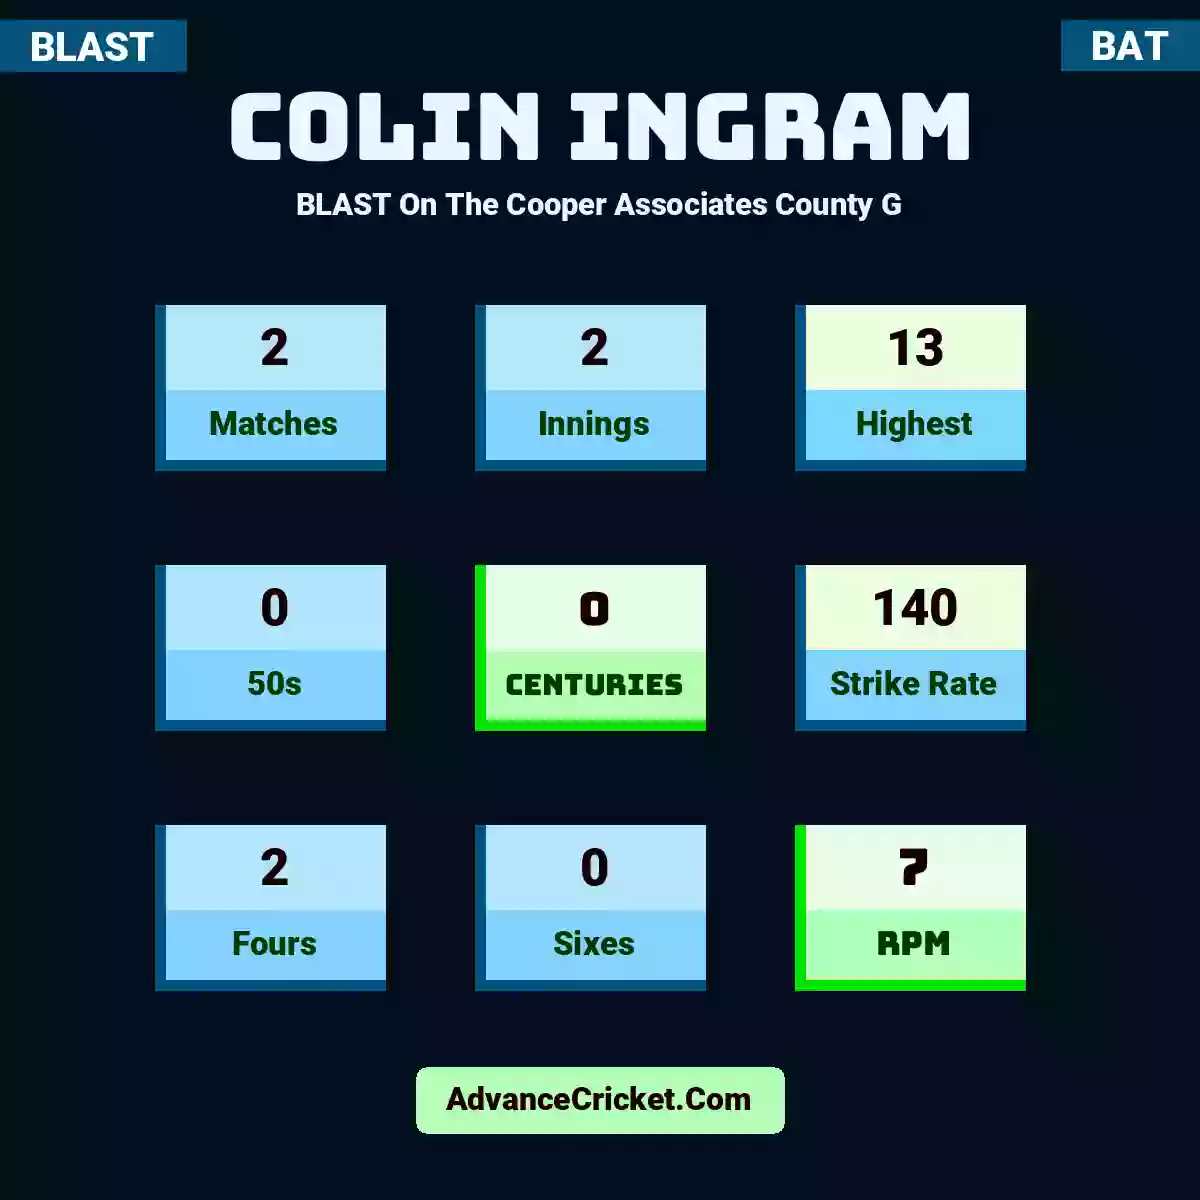 Colin Ingram BLAST  On The Cooper Associates County G, Colin Ingram played 2 matches, scored 13 runs as highest, 0 half-centuries, and 0 centuries, with a strike rate of 140. C.Ingram hit 2 fours and 0 sixes, with an RPM of 7.